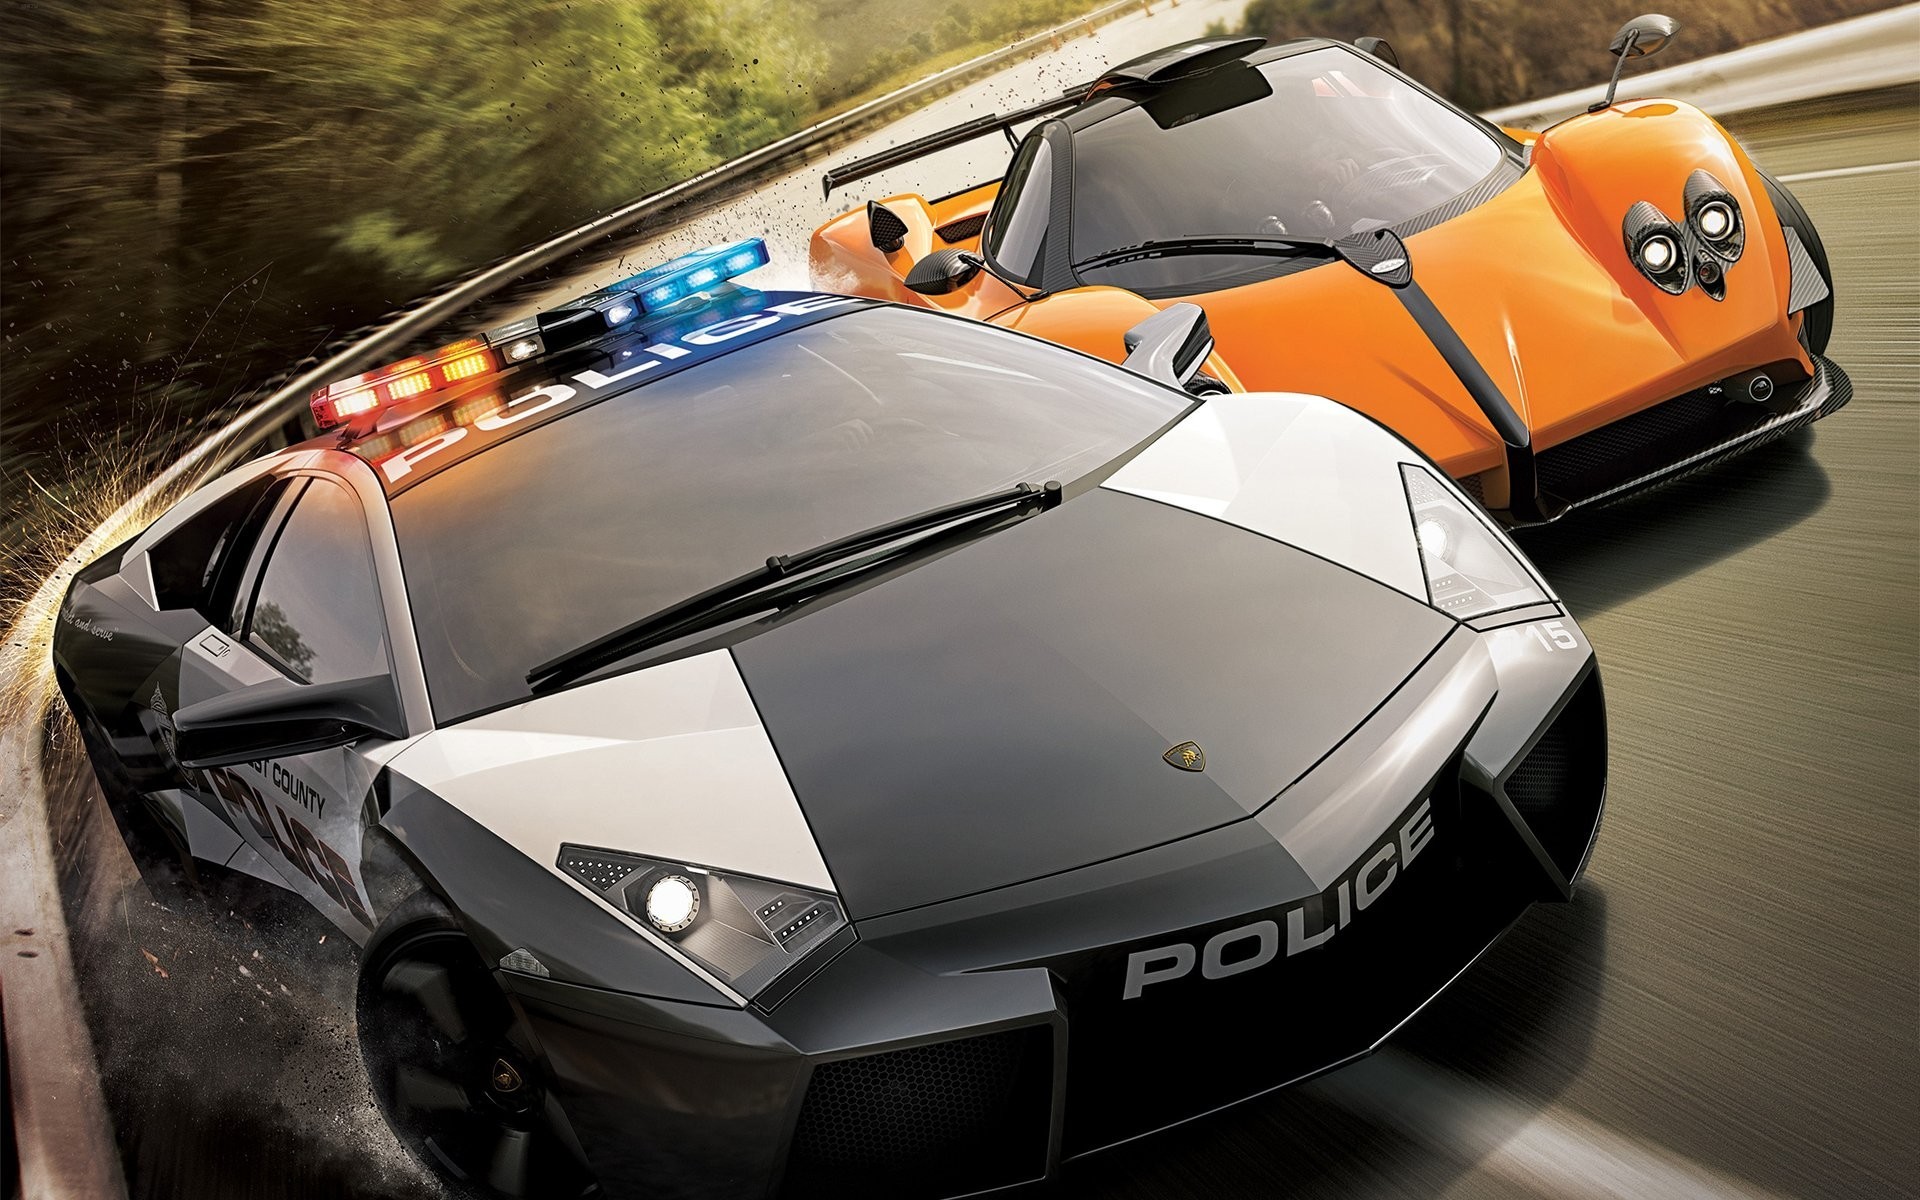 General 1920x1200 Need for Speed Need for Speed: Hot Pursuit video games video game art car racing vehicle black cars orange cars